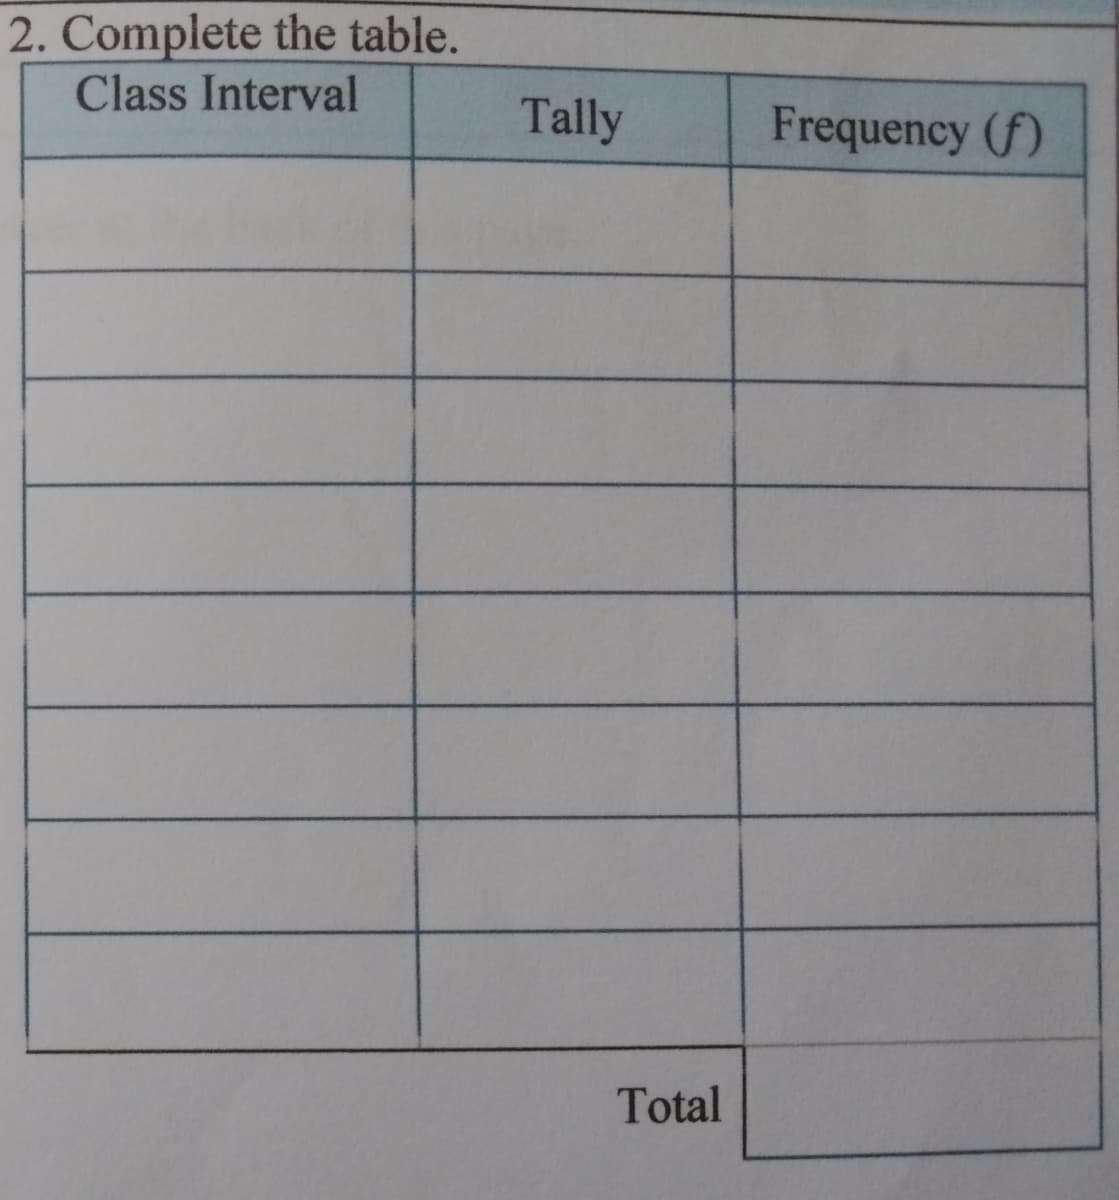 2. Complete the table.
Class Interval
Tally
Frequency (f)
Total
